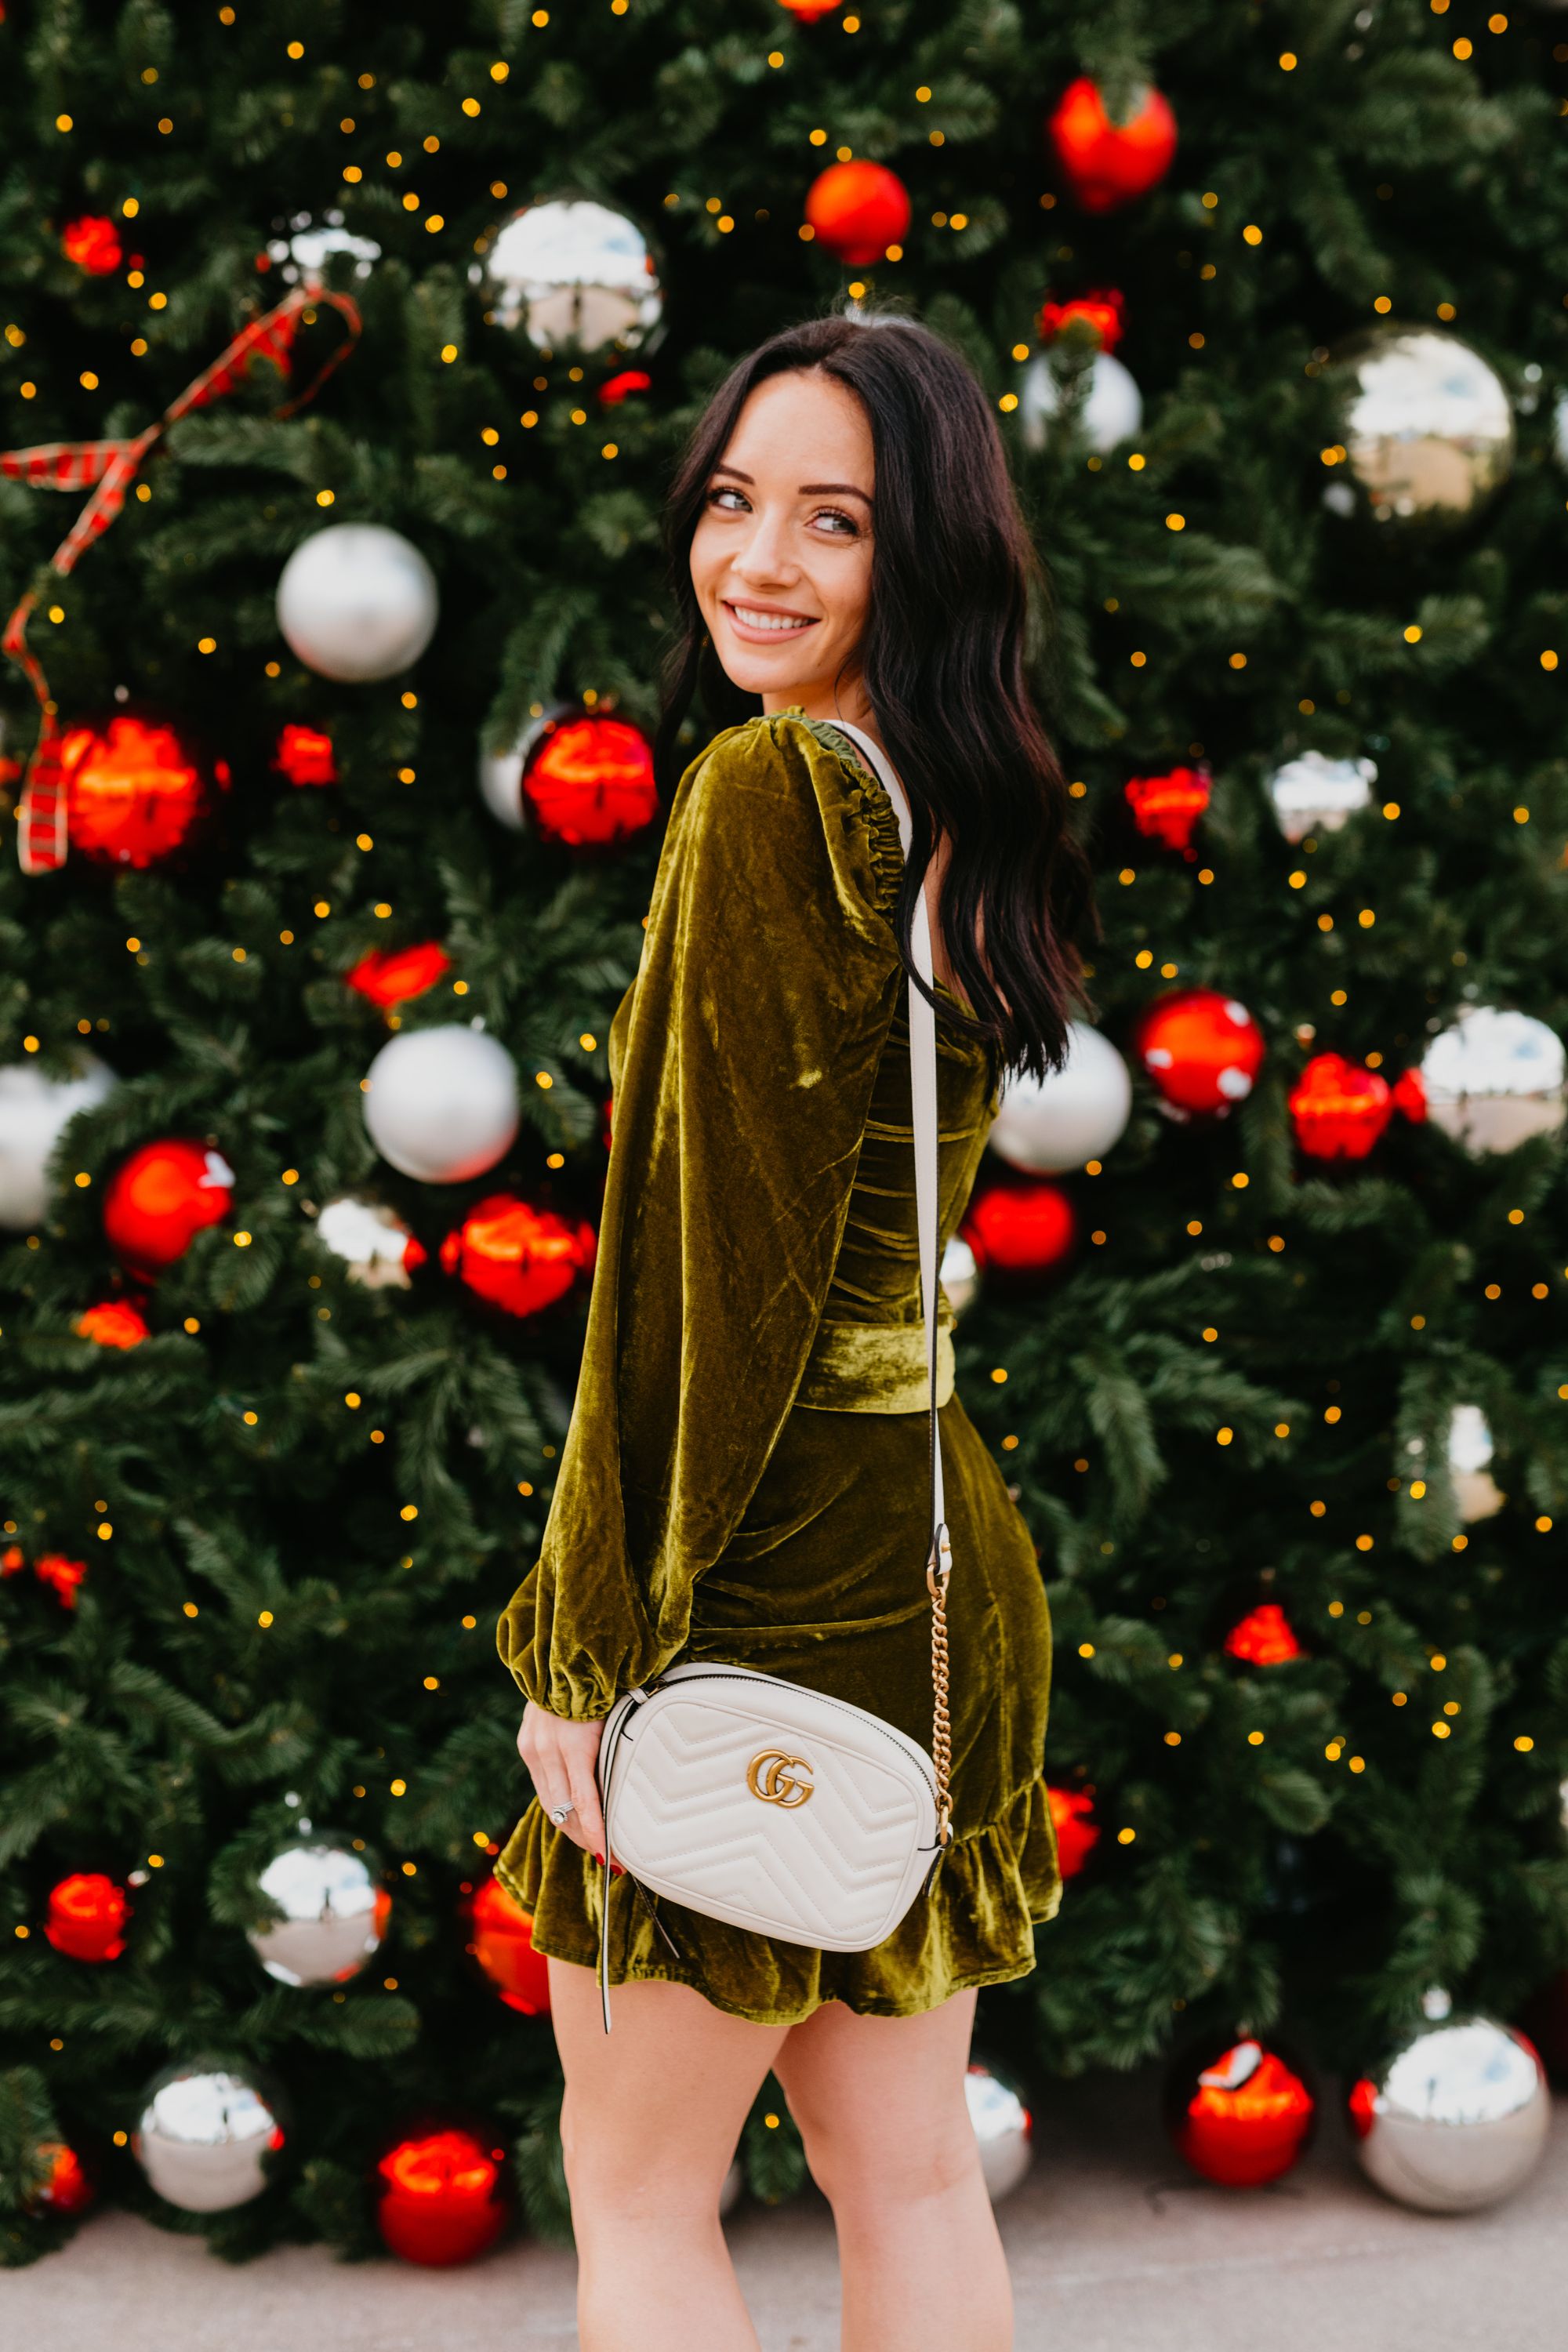 Glitz & Glam of the Holidays: 5 Head-Turning Petite Outfits for Dressy Occasions